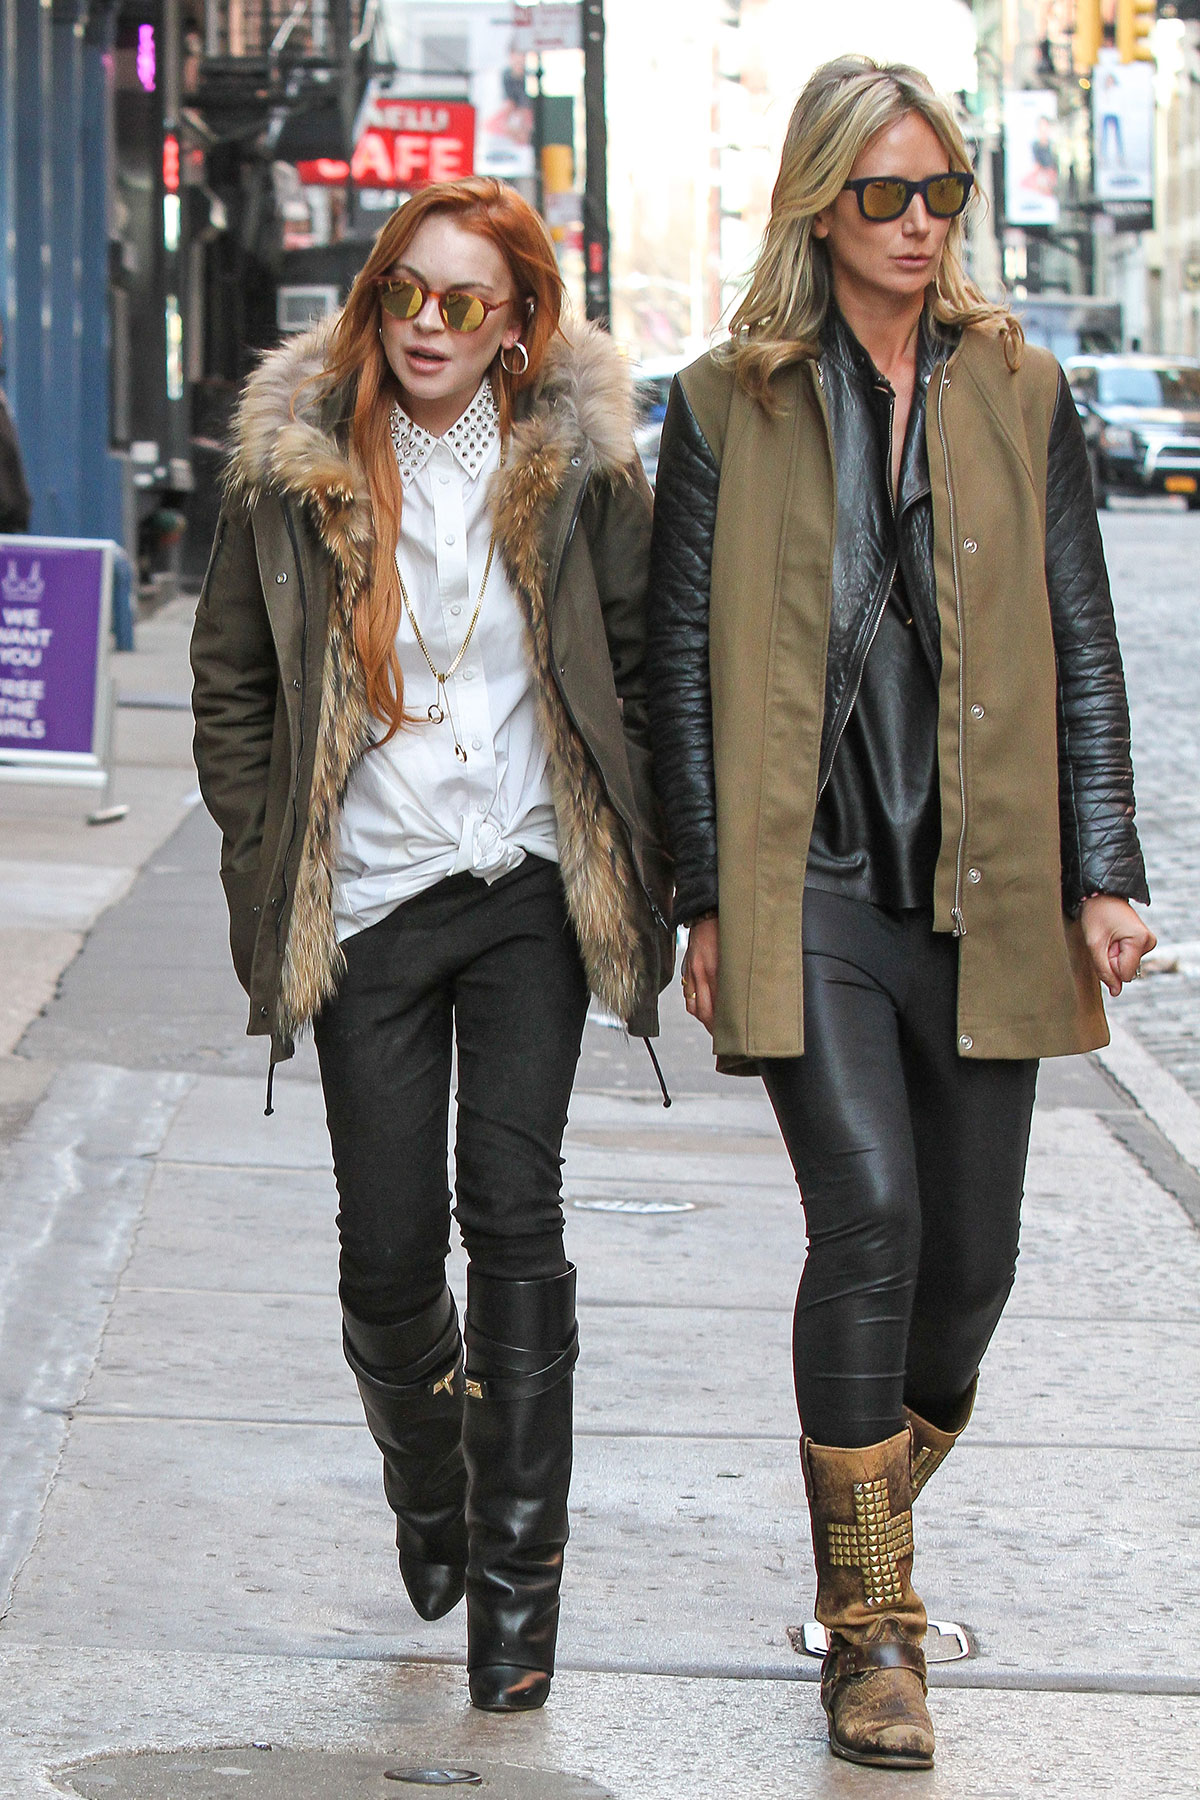 Lindsay Lohan taking a stroll with former model Lady Victoria Hervey